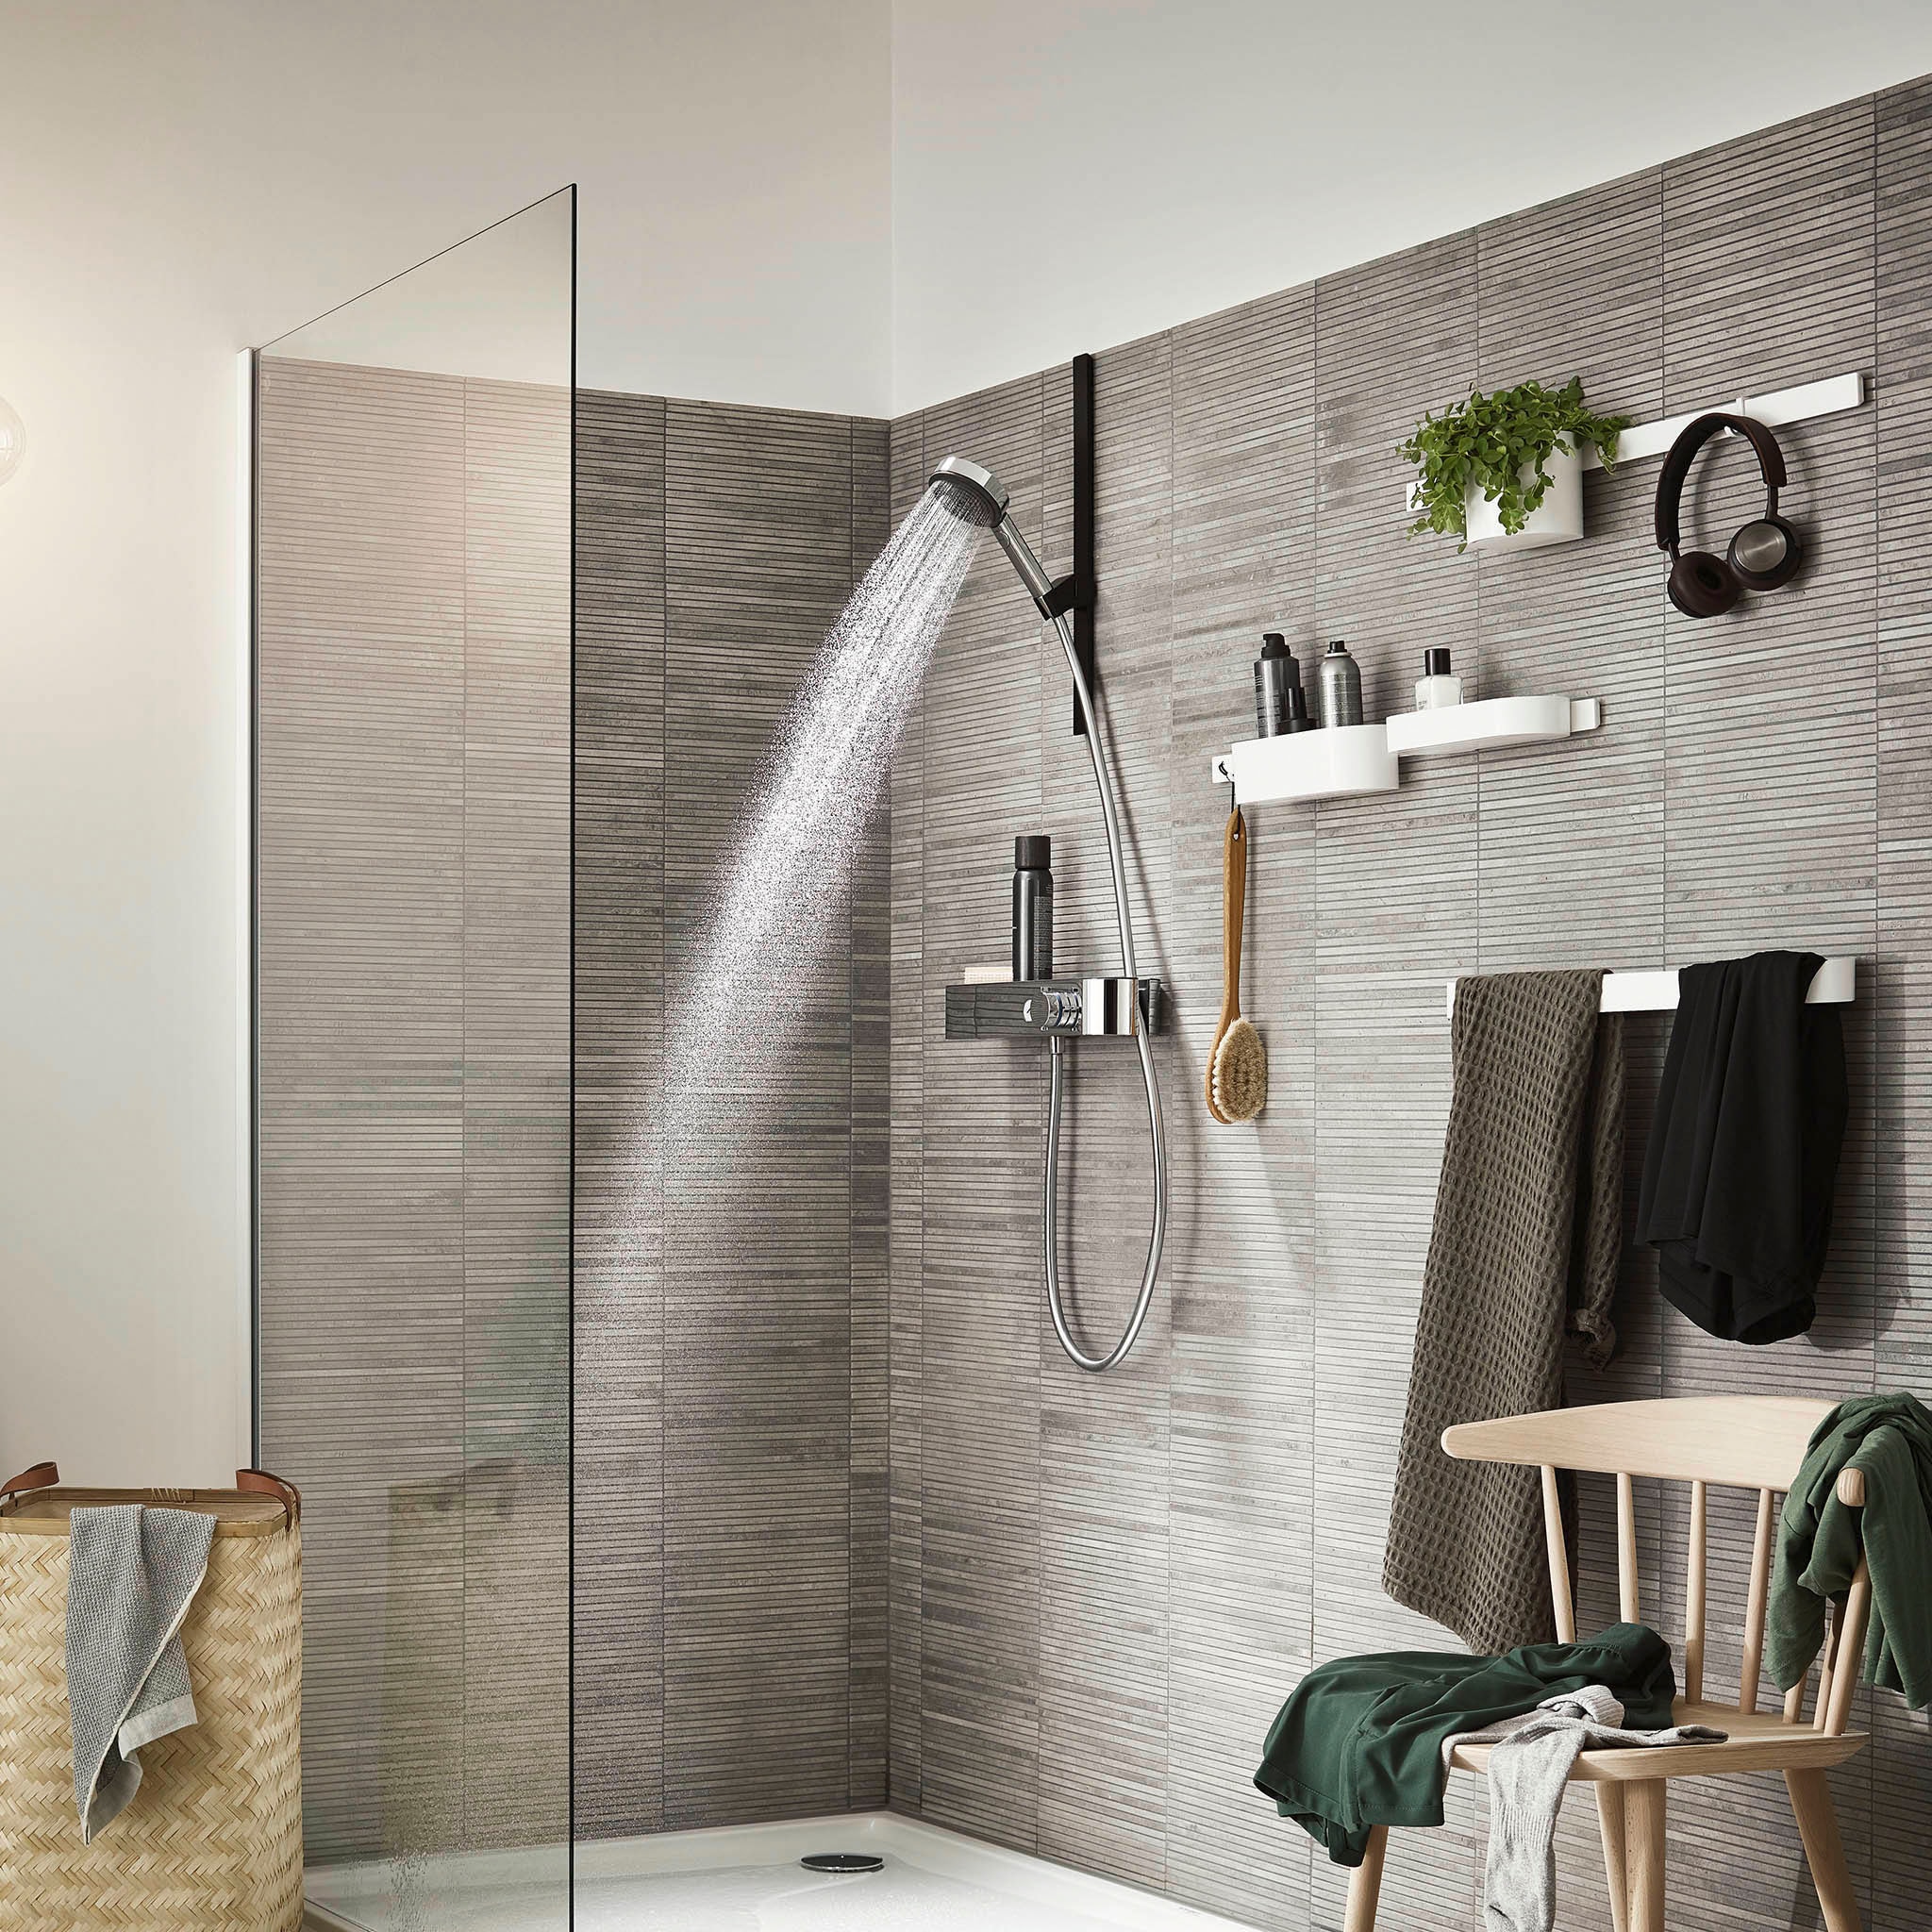 hansgrohe Handbrause »Pulsify Select S«, 10,5cm, 3 Strahlarten Relaxation